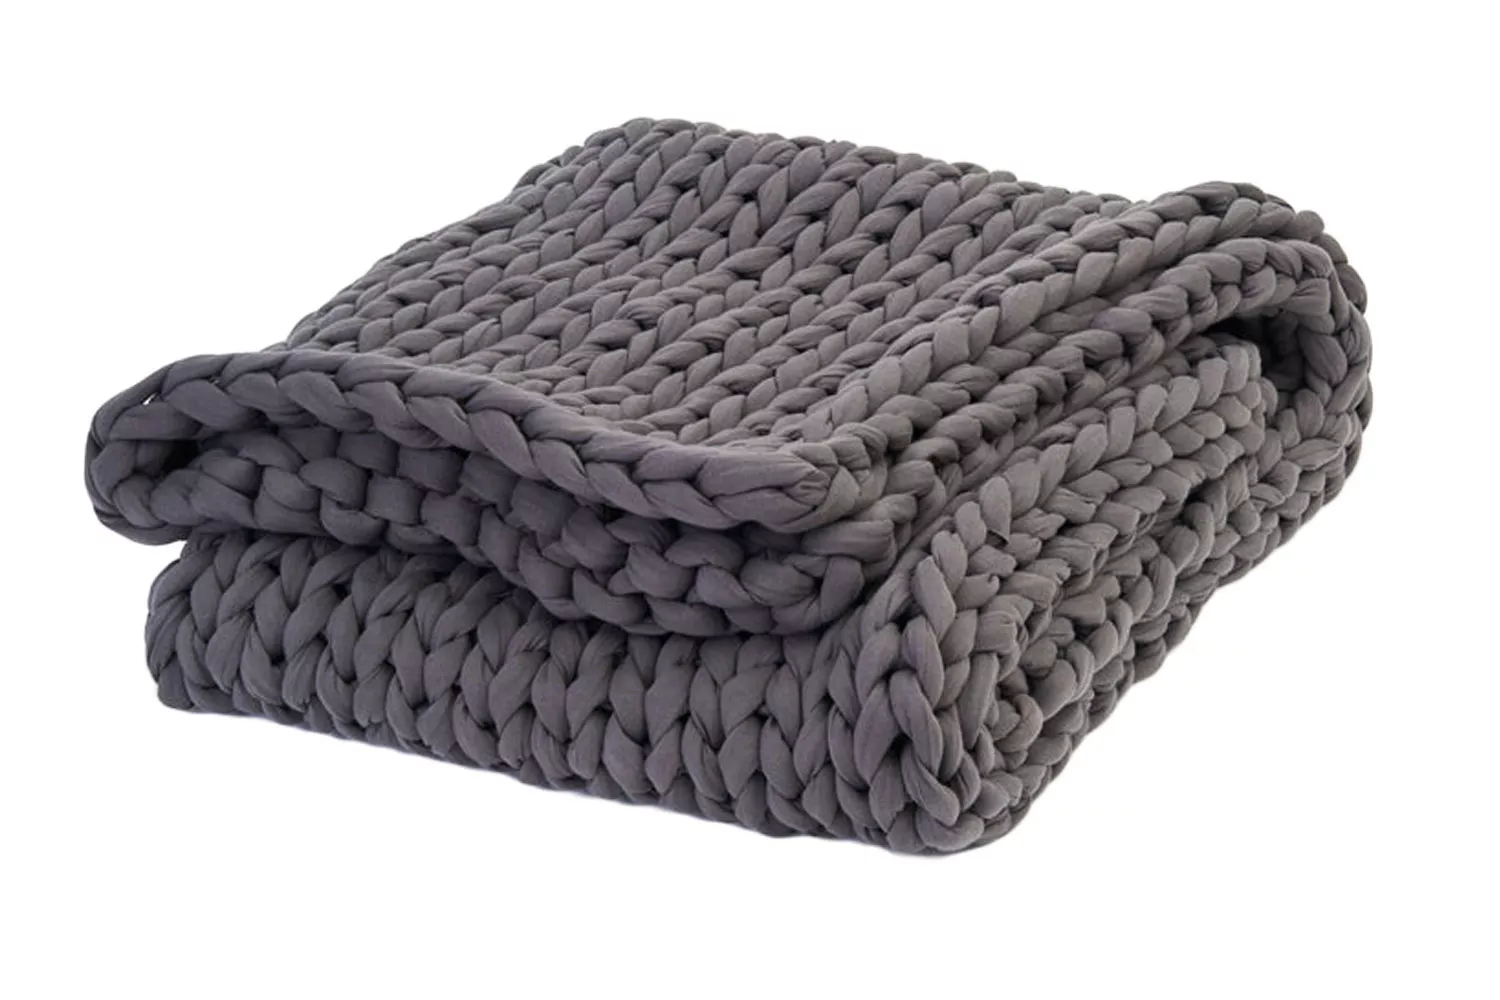 Bearaby Cotton Napper Weighted Blanket